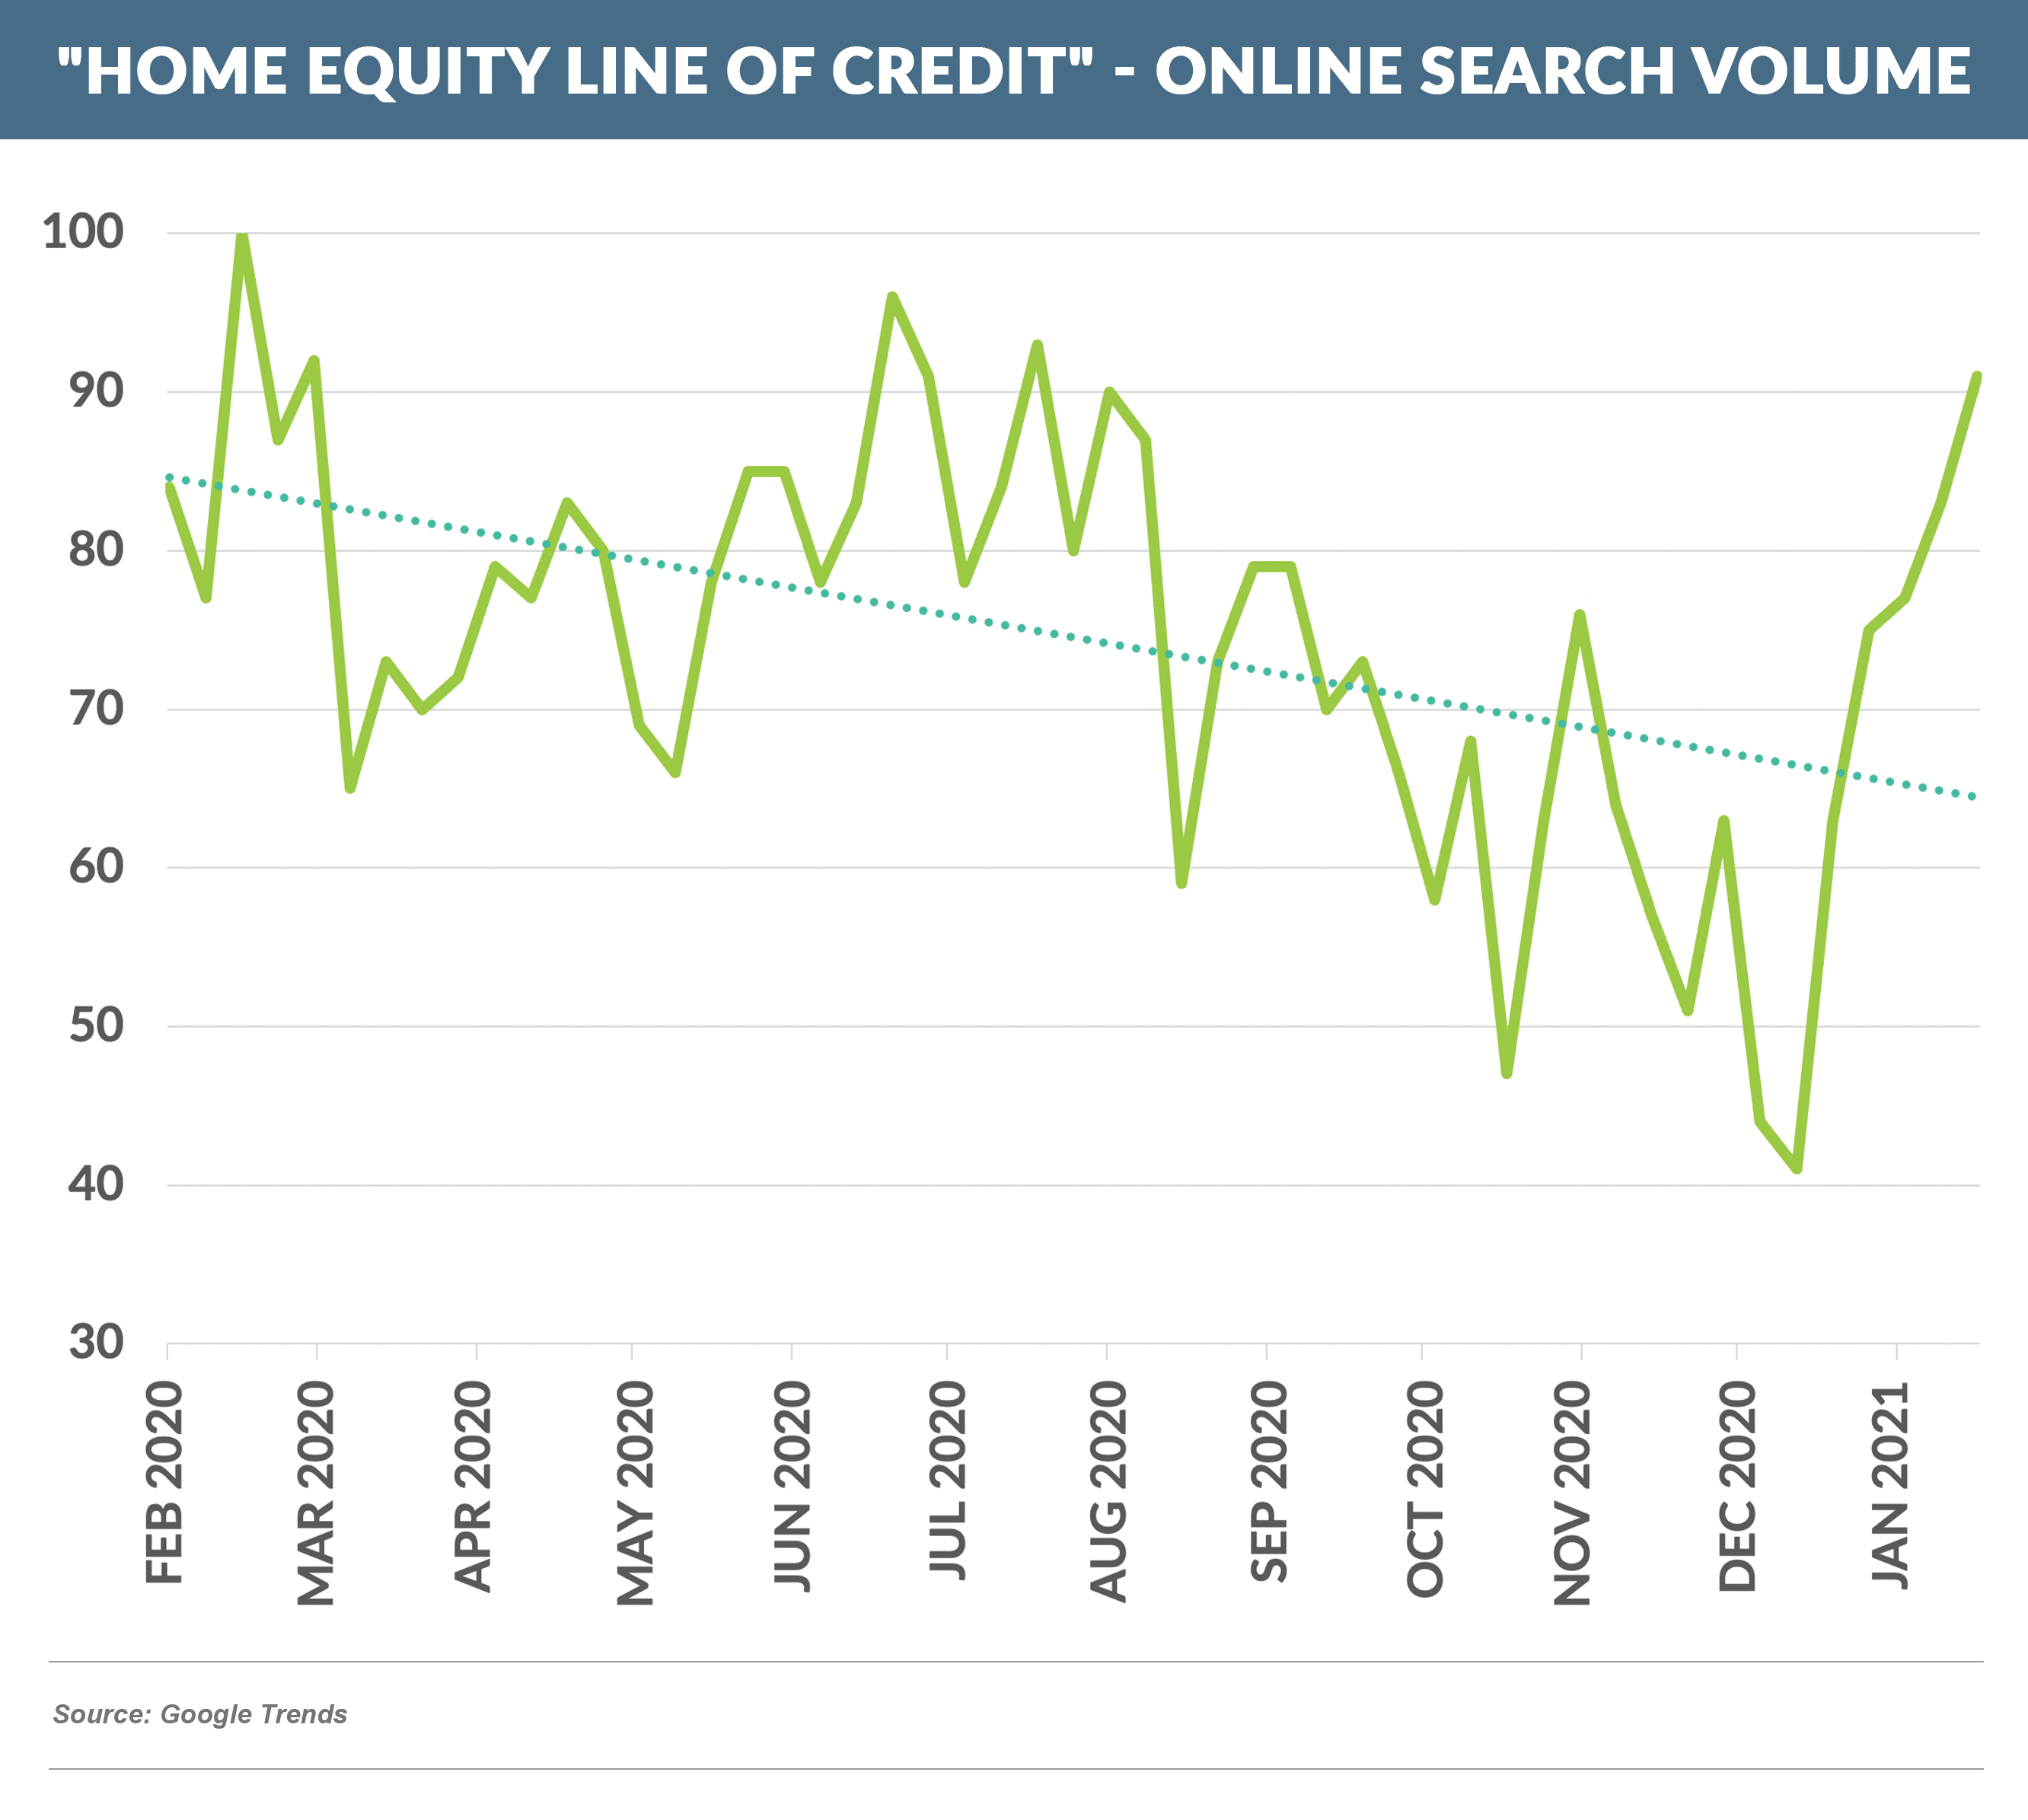 Home Equity Line of Credit - Online Search Volume